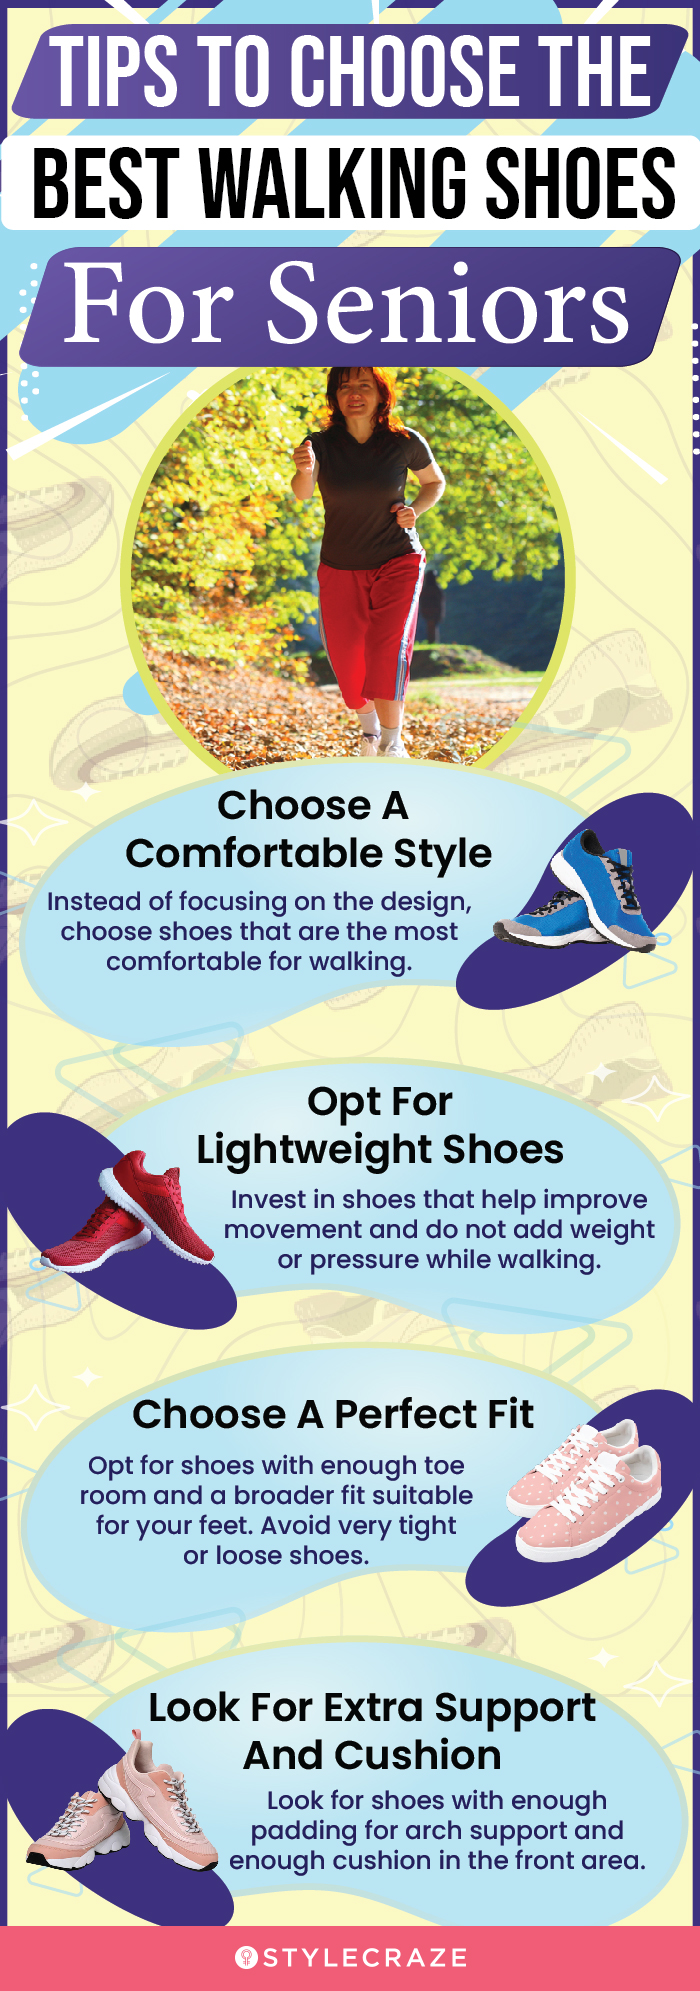 Tips To Choose The Best Walking Shoes For Seniors (infographic)